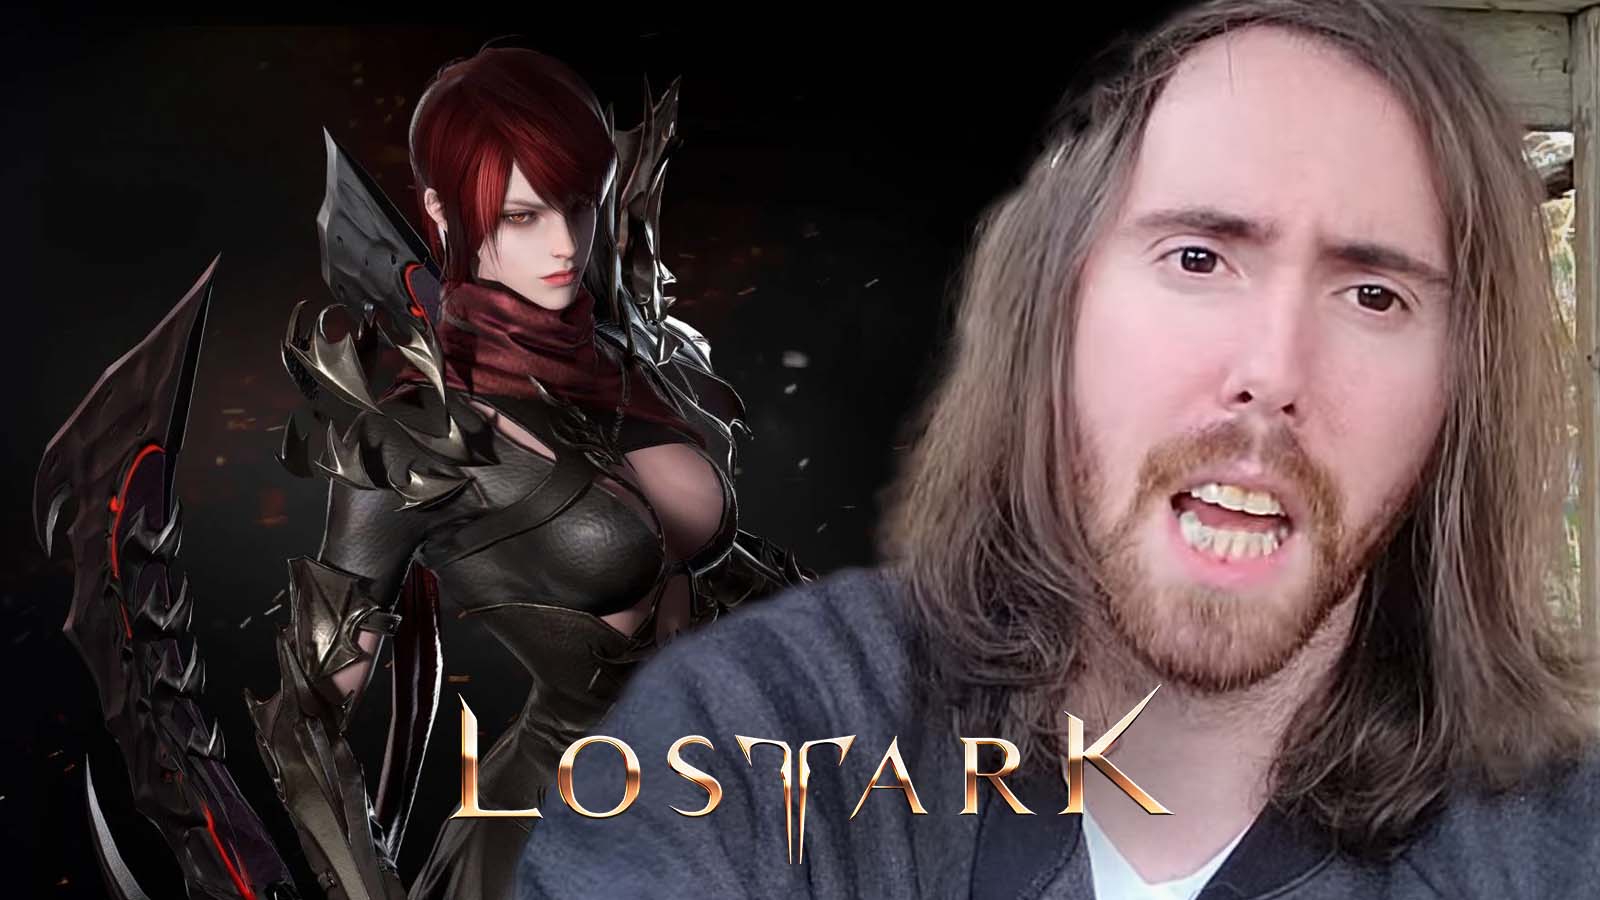 lost-ark-asmongold-double-standards-characters